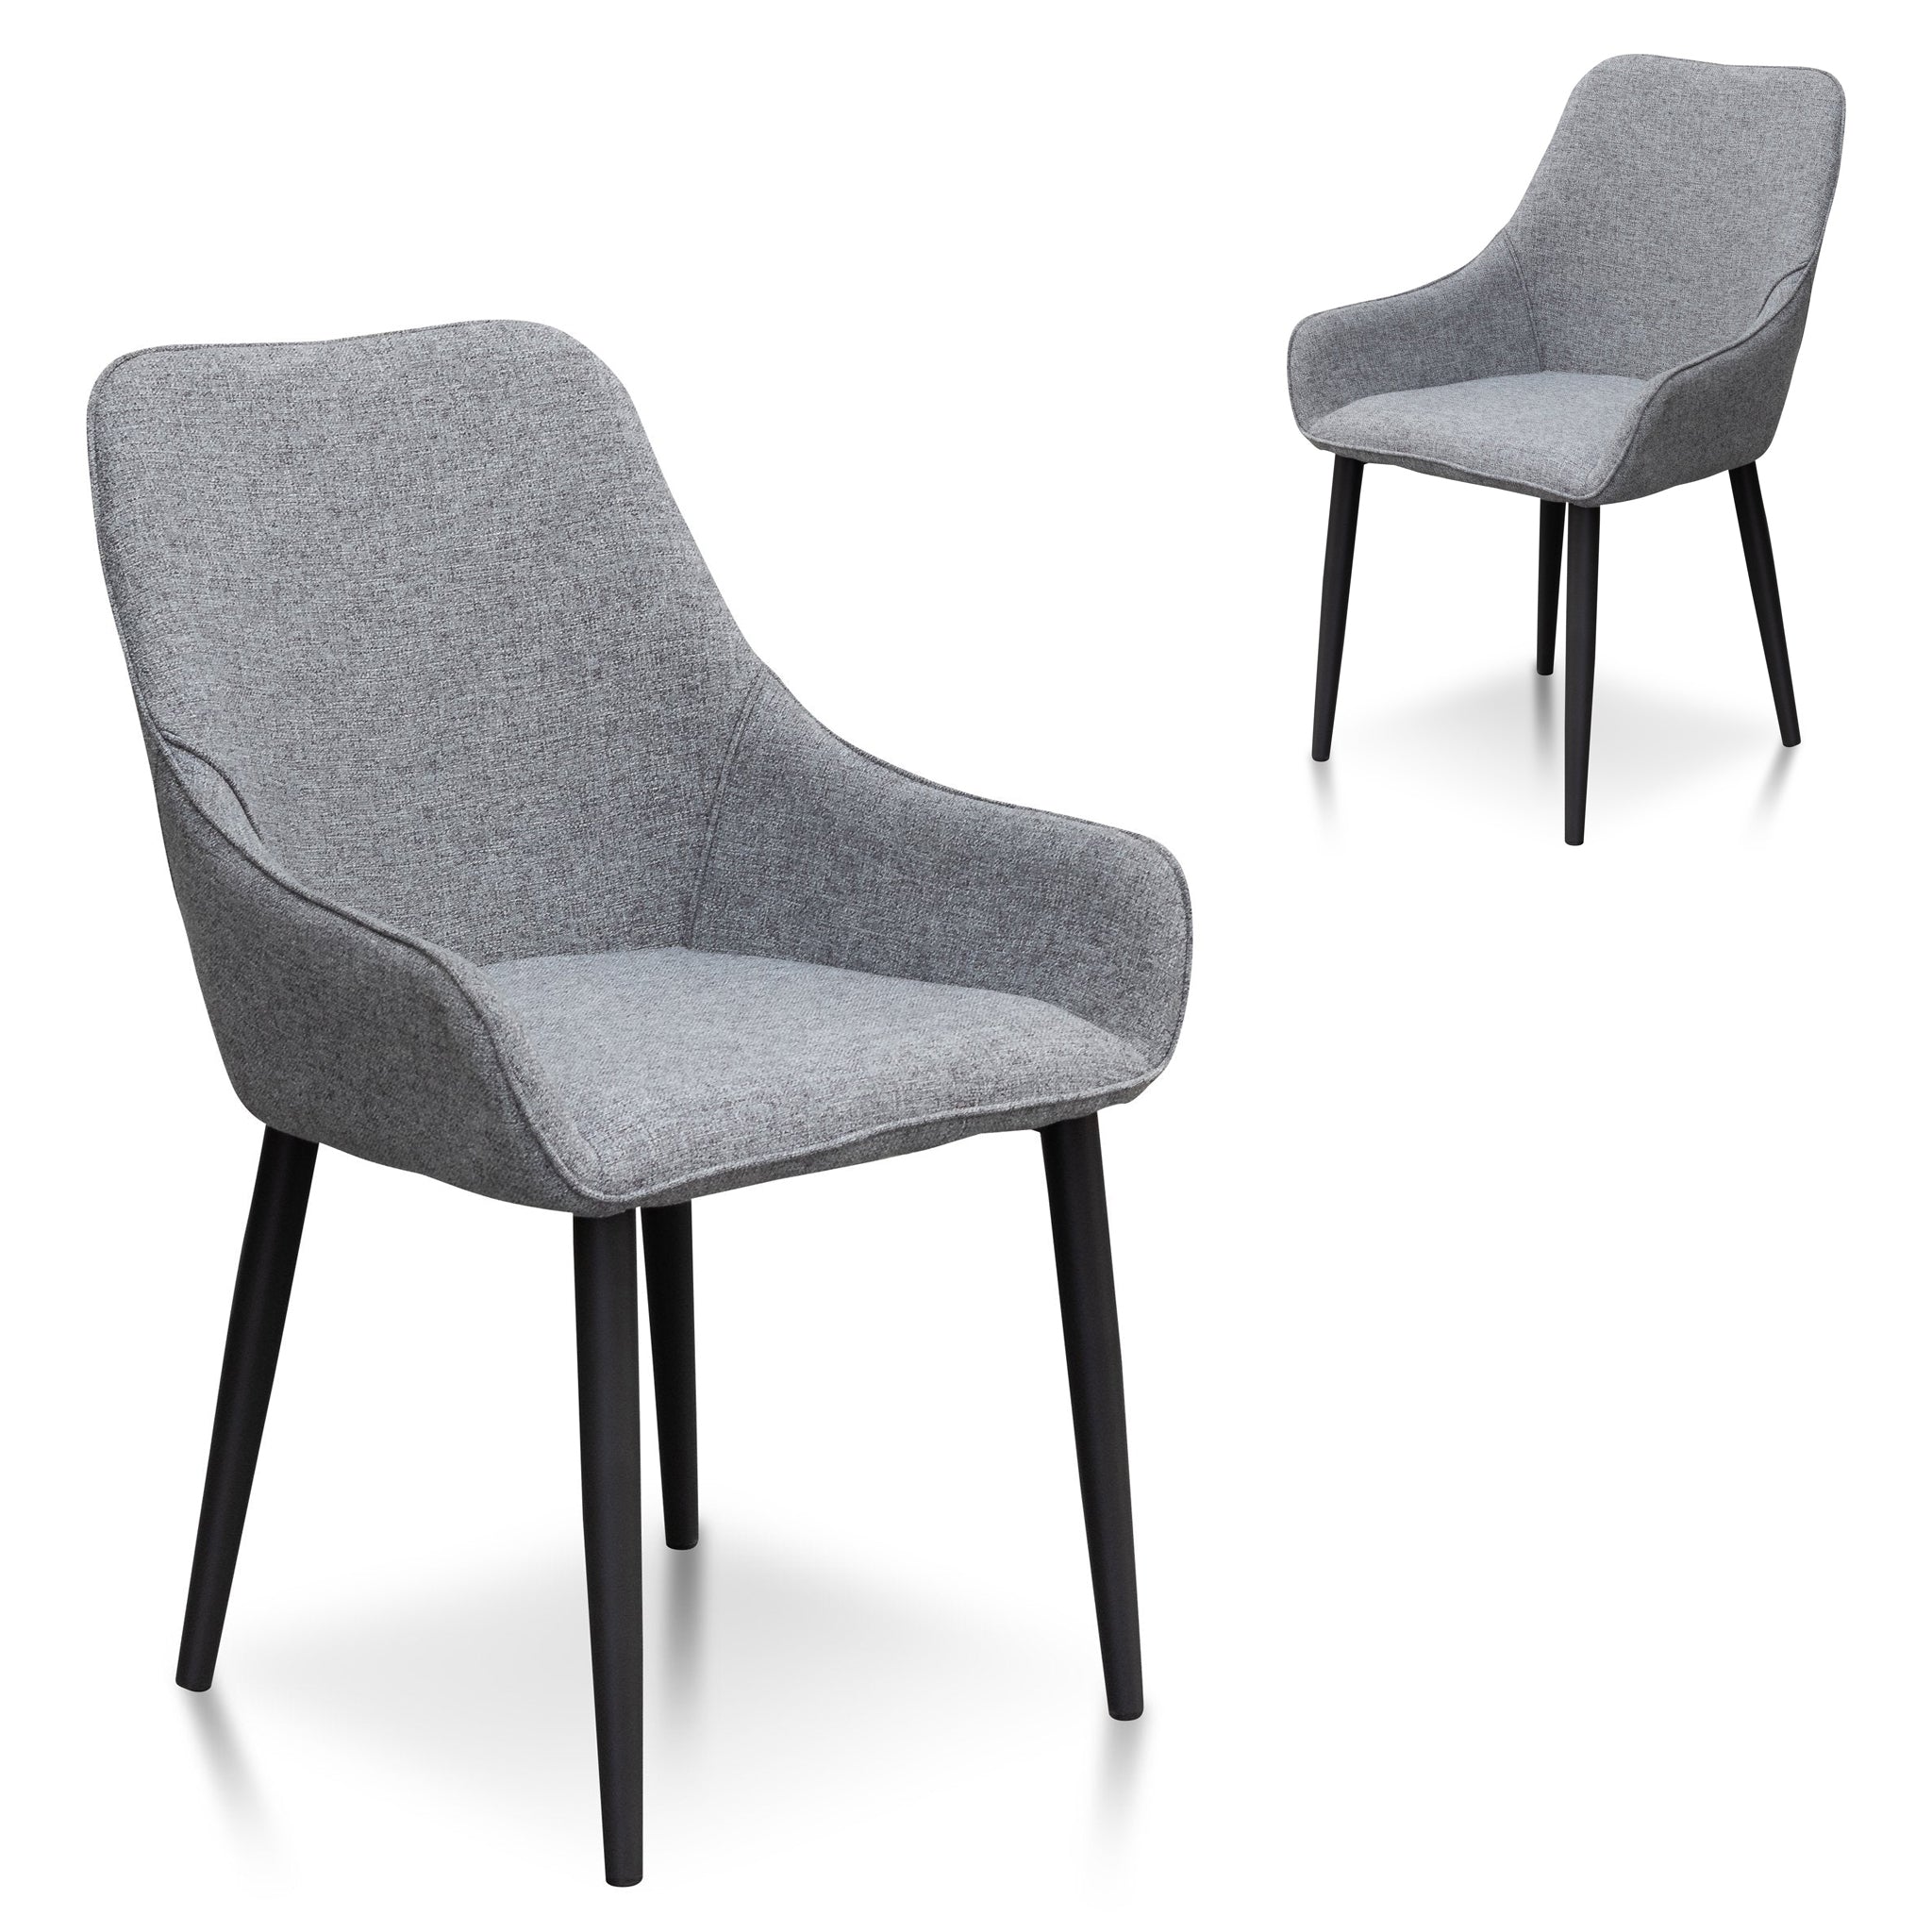 Set of 2 Jasmin Fabric Dining Chair - Pebble Grey - Dining Chairs